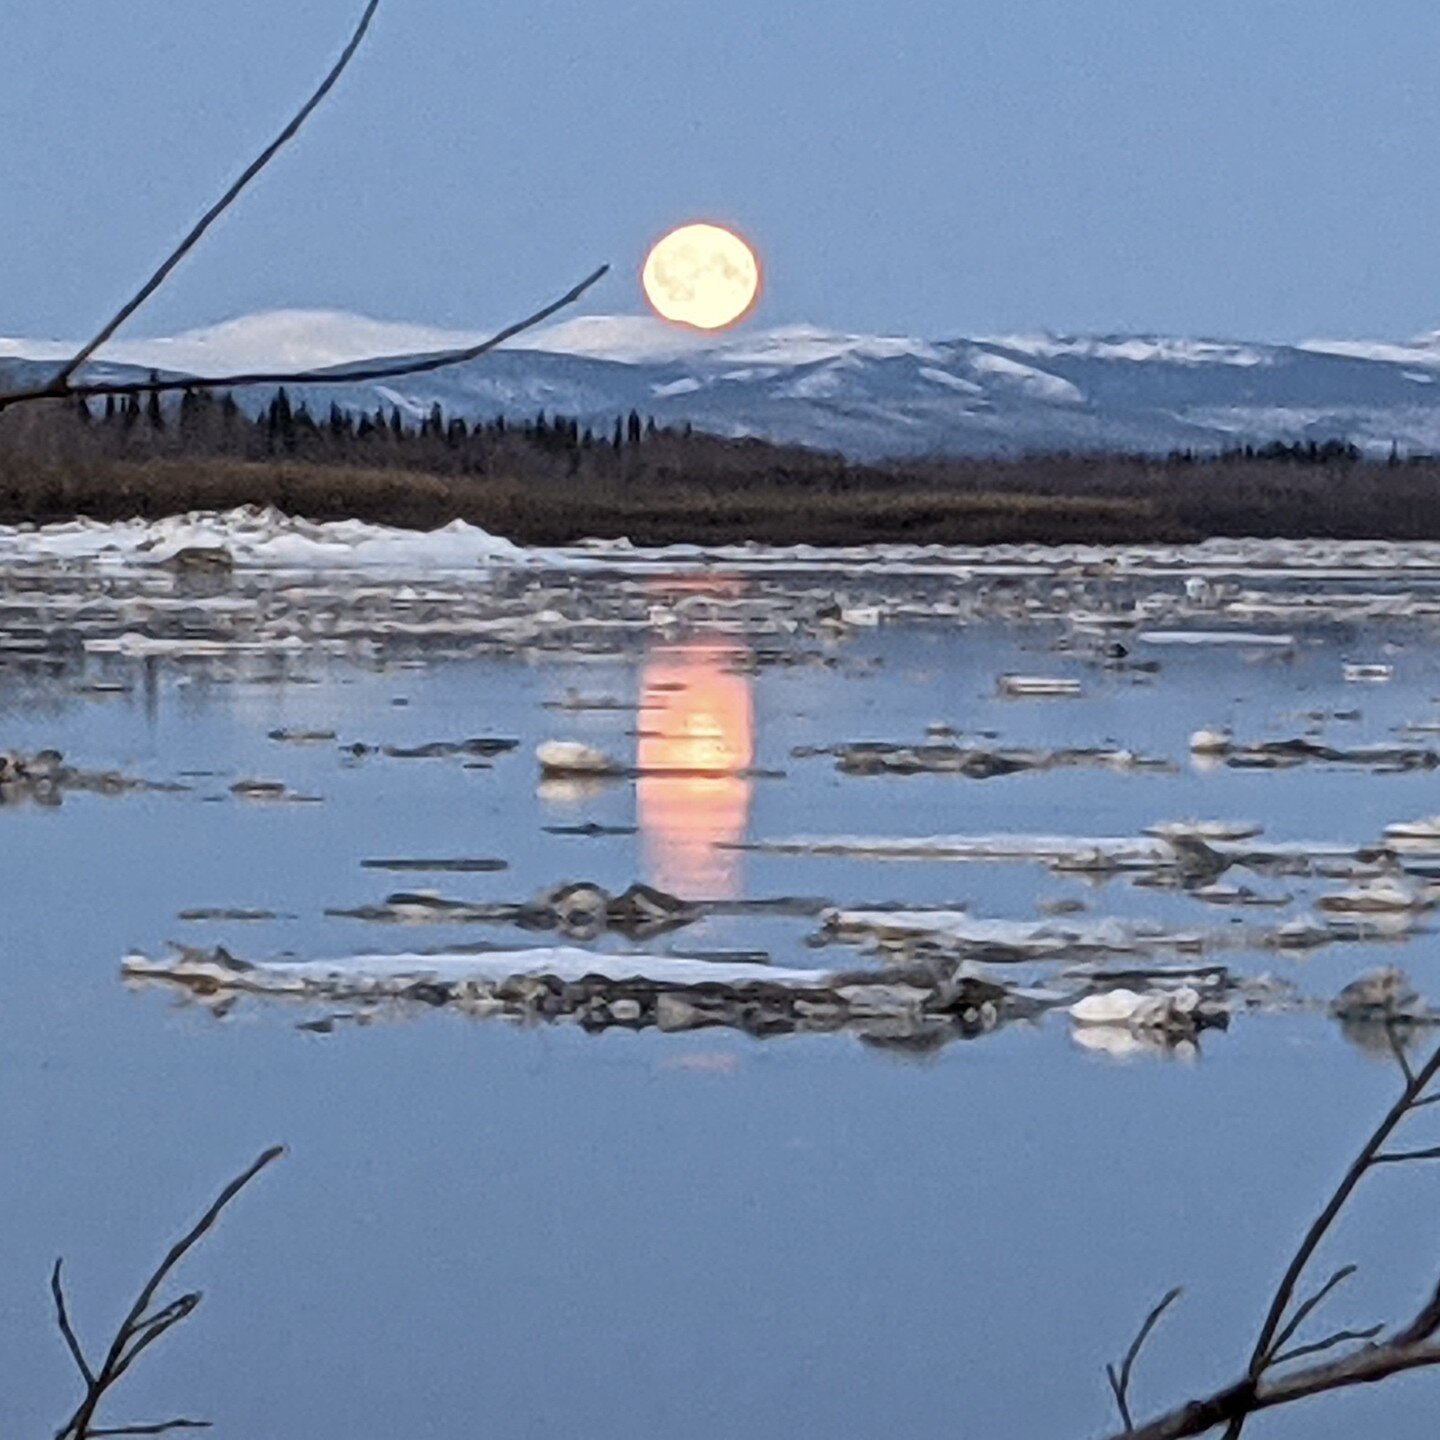 &quot;Stop acting so small. You are the universe in ecstatic motion&quot; - Rumi

The Full Moon over the mighty Yukon. I love this photo because it's low resolution makes it look like a painting ❤️

To hear yesterdays Full Moon episode, click through